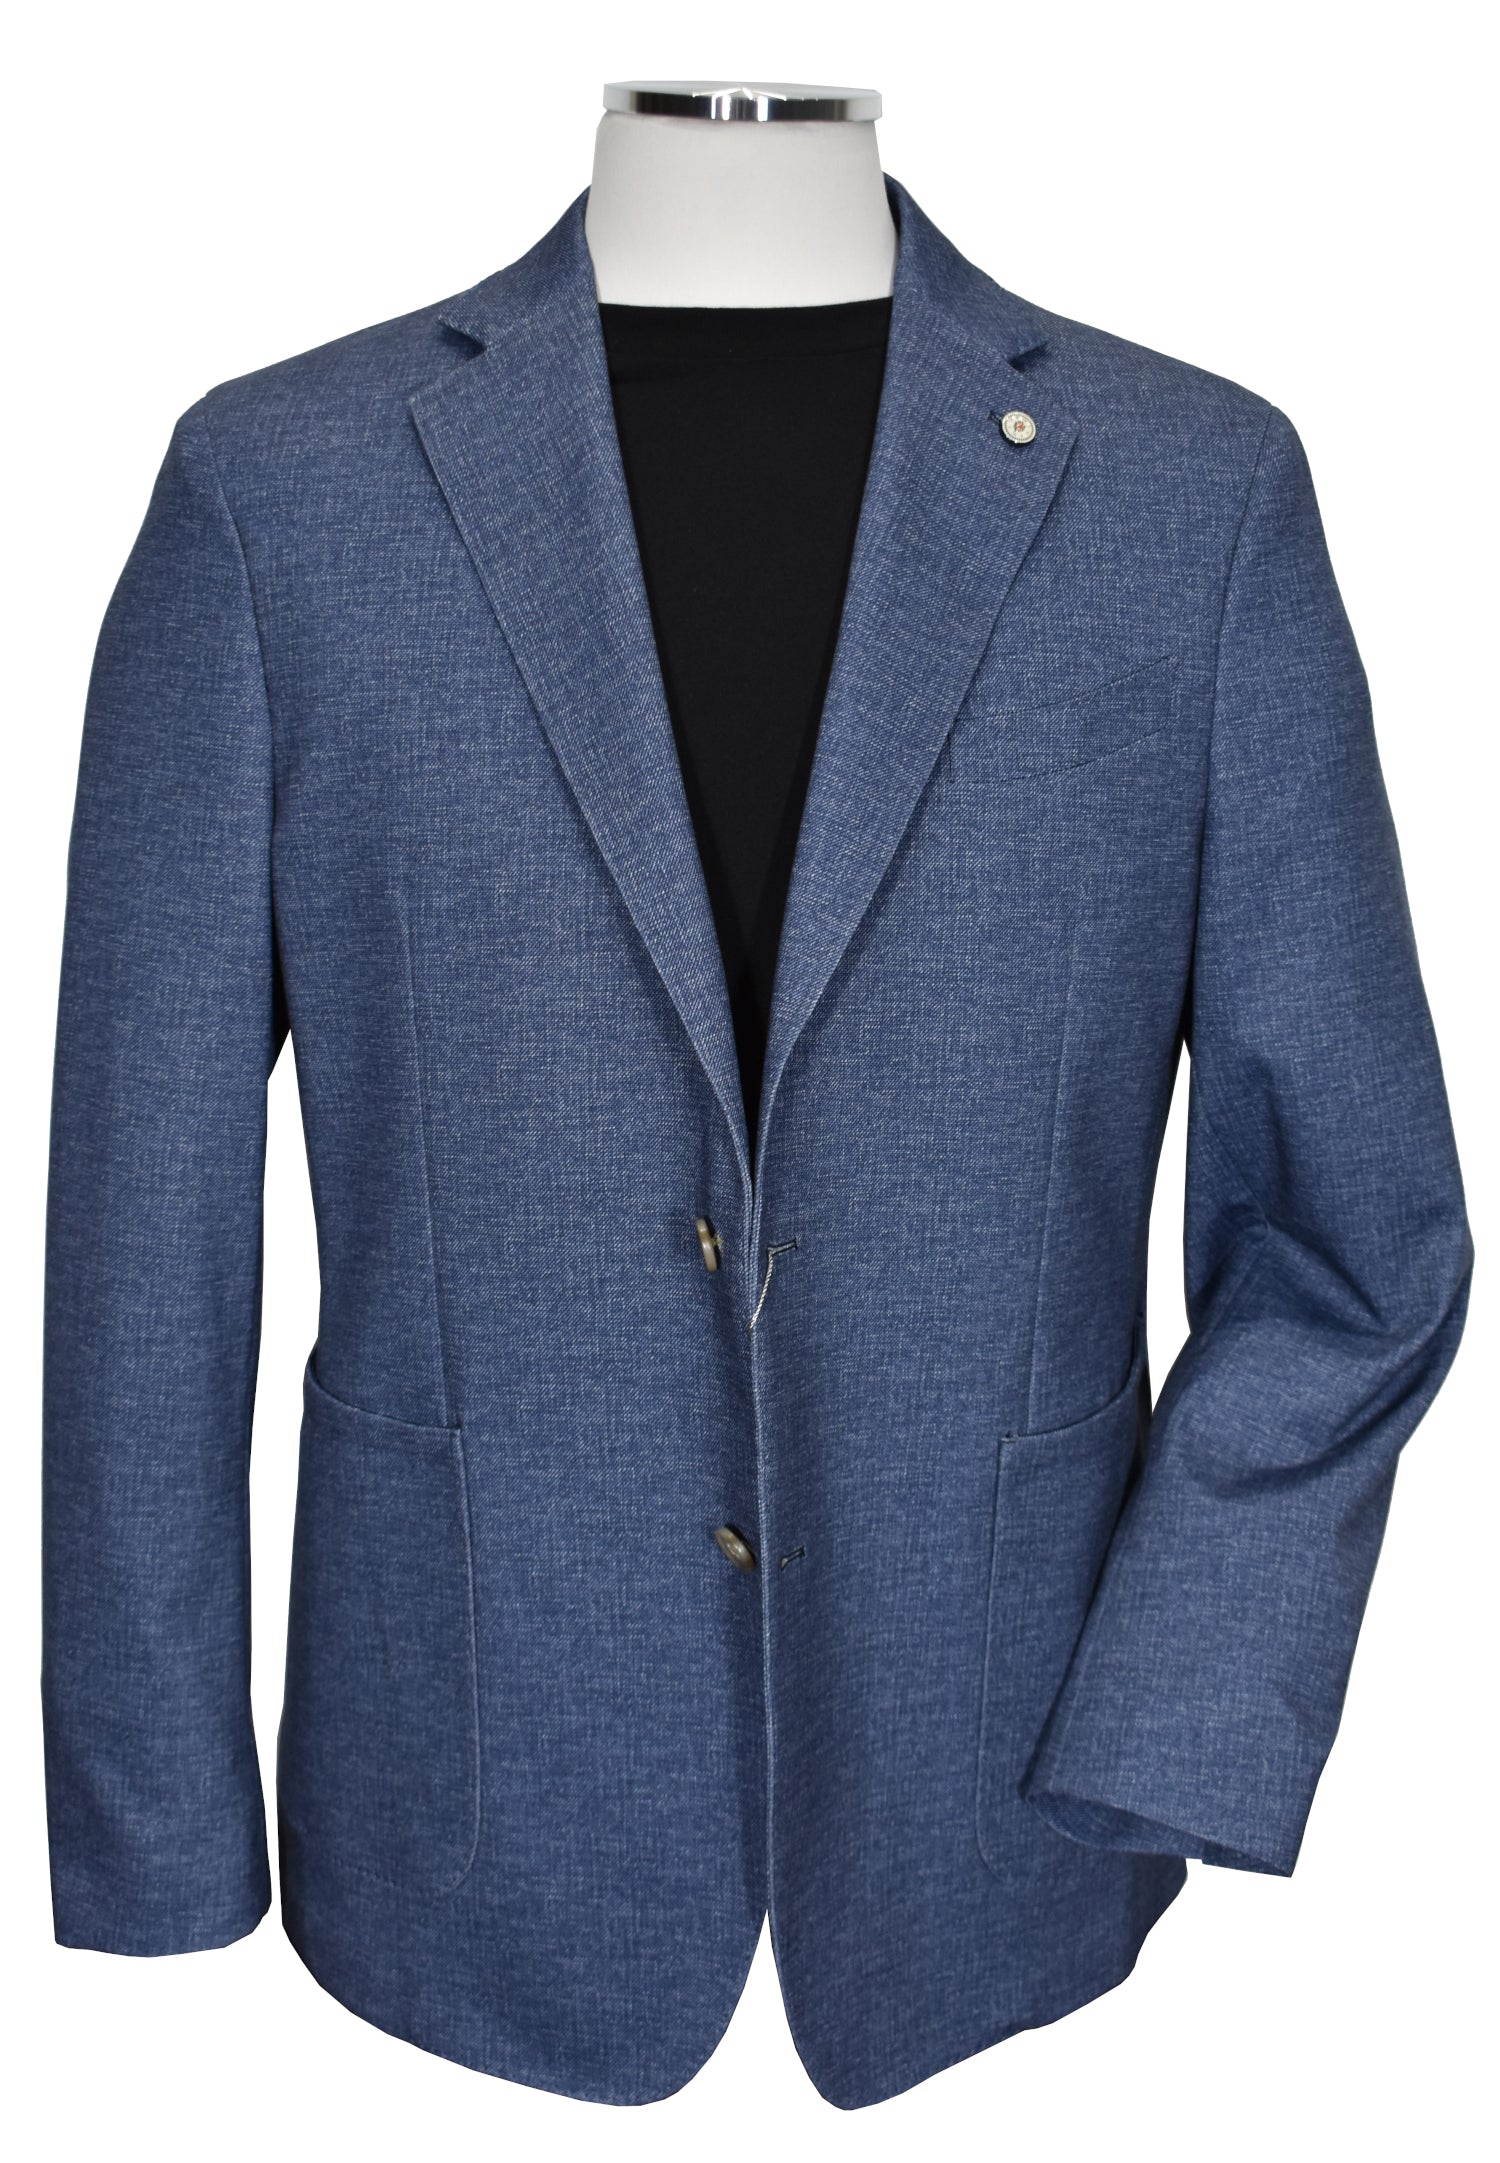 Style this fashion sport coat either cool and casual with jeans or dress it up with a dressy pant and sport shirt. The slim fit stretch model is 72% cotton 26% linen and 2% spandex, and side vented. Slim fit stretch, 86 microfiber 9 rayon 5 spandex, side vented.